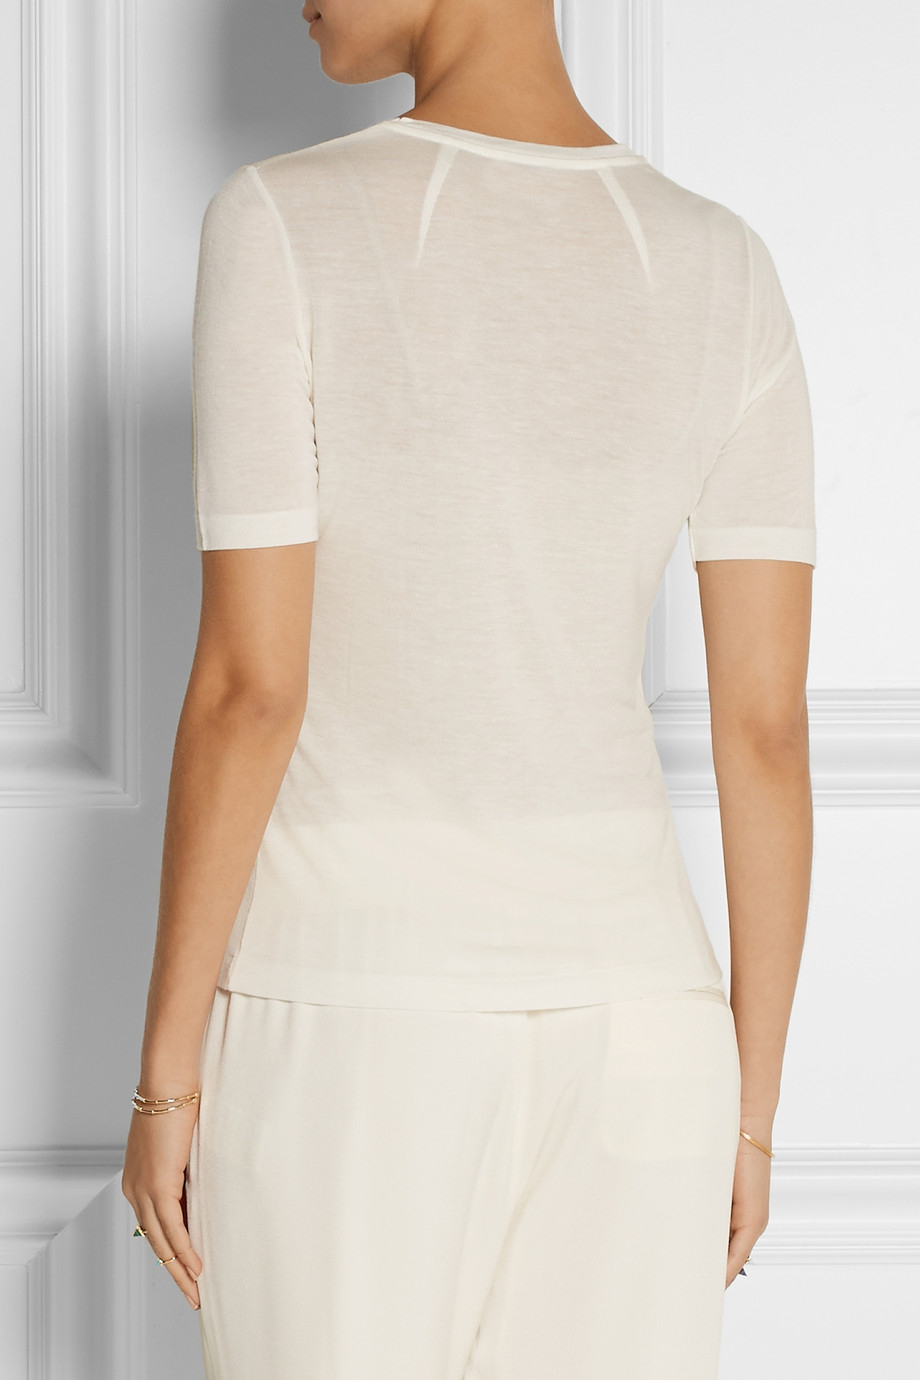 Totême Stockholm Micro Modal And Cashmere-Blend T-Shirt in White - Lyst